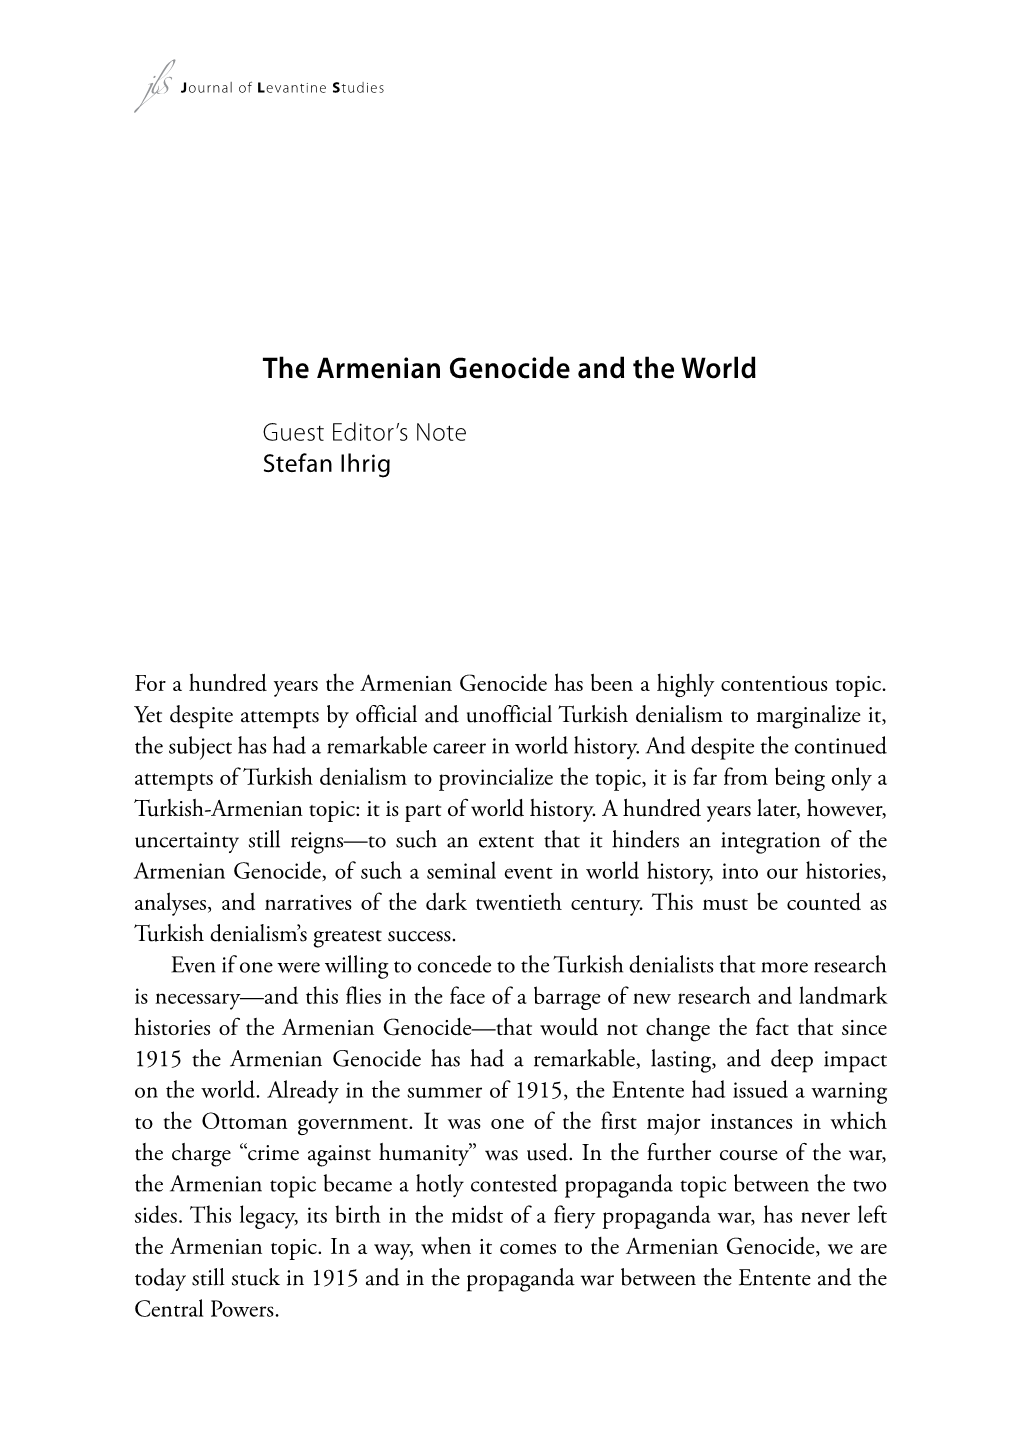 The Armenian Genocide and the World